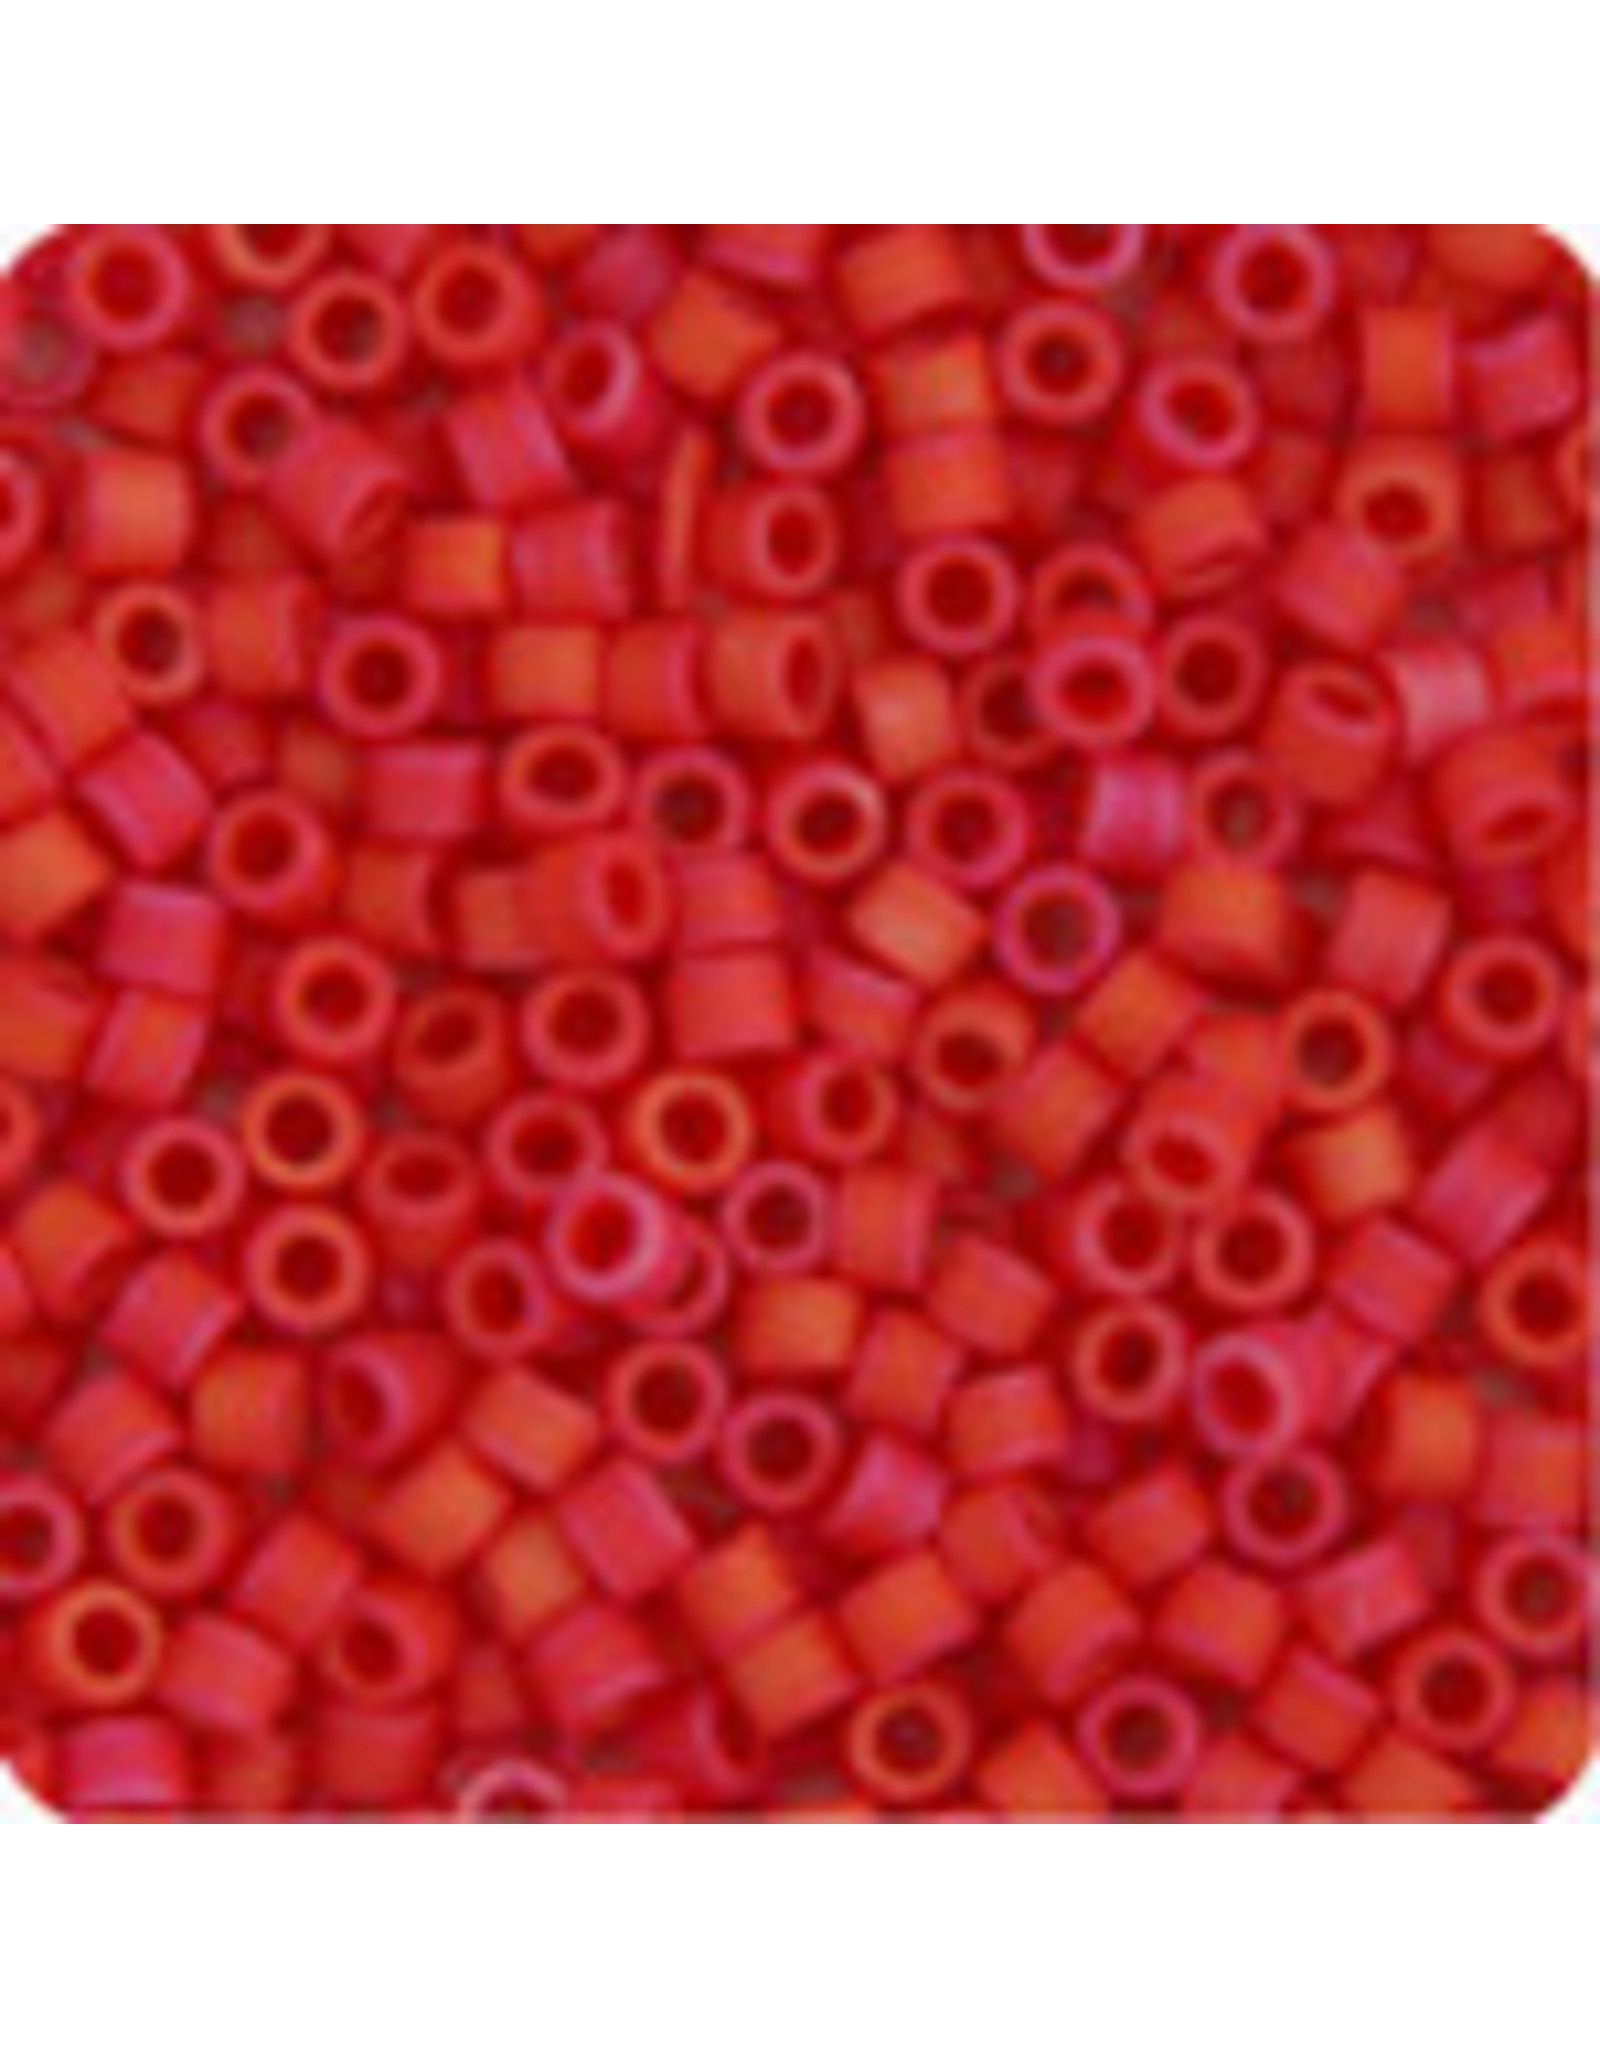 db362 11 Delica 3.5g Opaque Red AB Matte